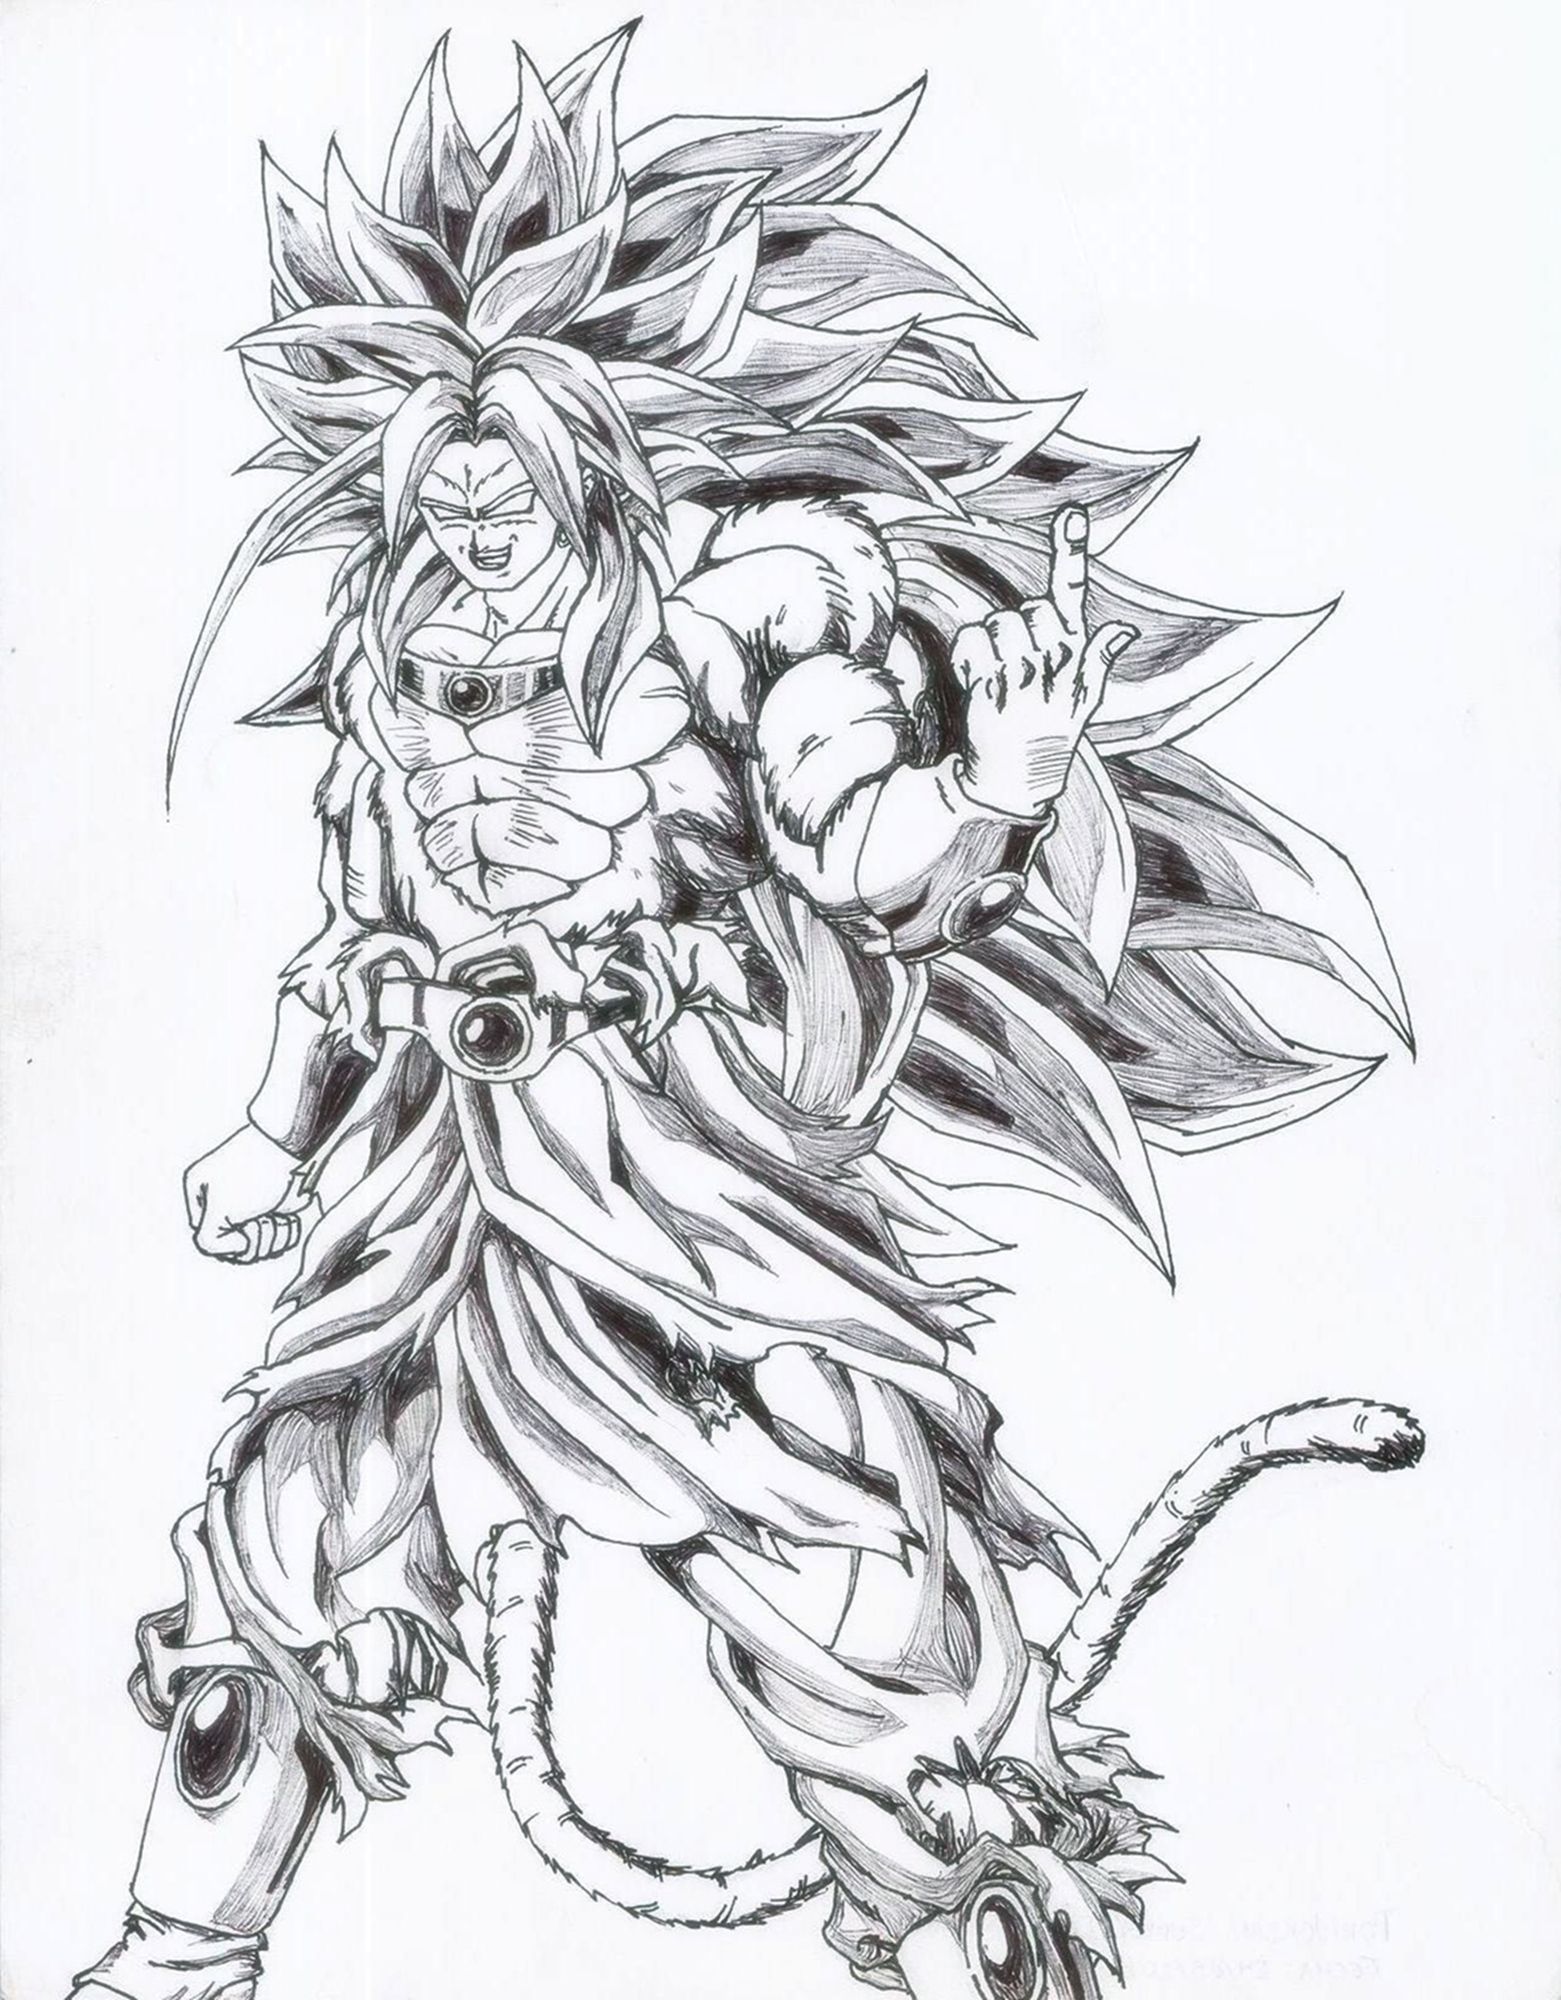 MERIMO only (commissions open) on X: goku ssj5 from toyotaro's dragonball  af in modern style ✌️✌️#goku #broly #dessin #darwing #ssj5   / X